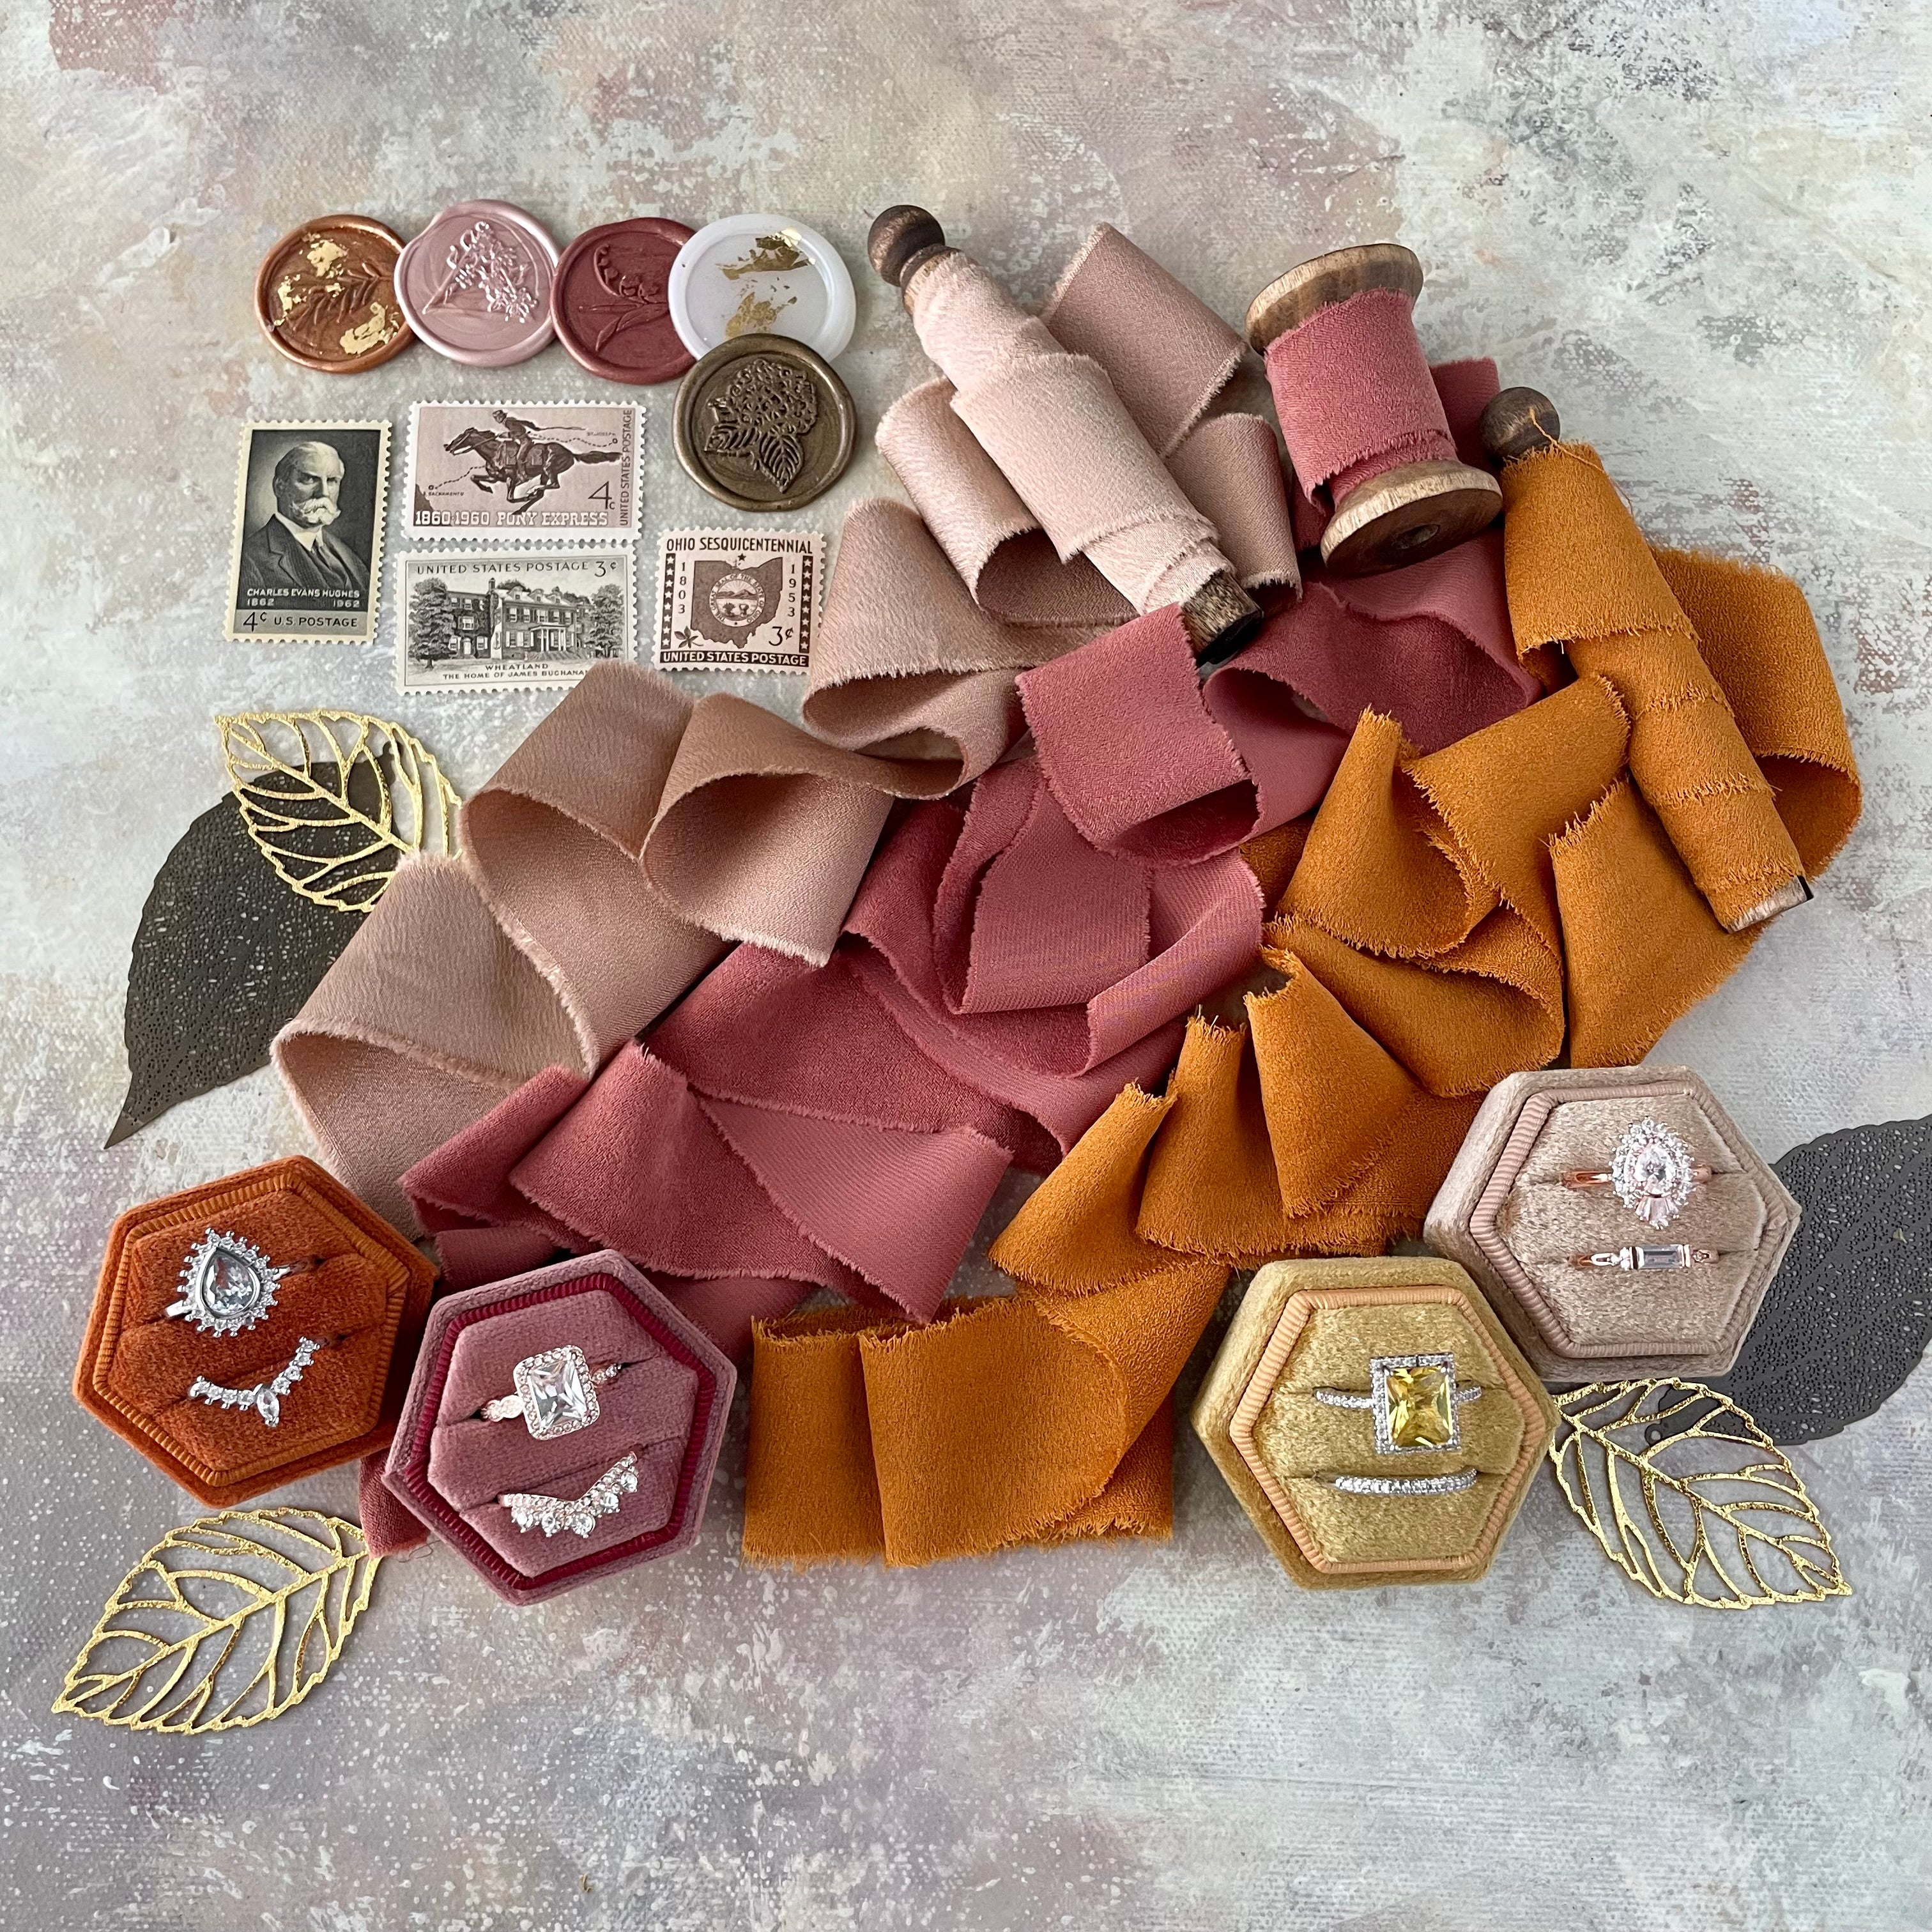 Rust & Terracotta Flat Lay Prop Styling Kit including burnt orange ring box, desert rose ringbox, antique gold ring box, camel ring box, 4 vintage stamps, 5 wax seals, 5 metal styling leaves, 3 spools of ribbon - Wedding Flat lay props from Champagne & GRIT